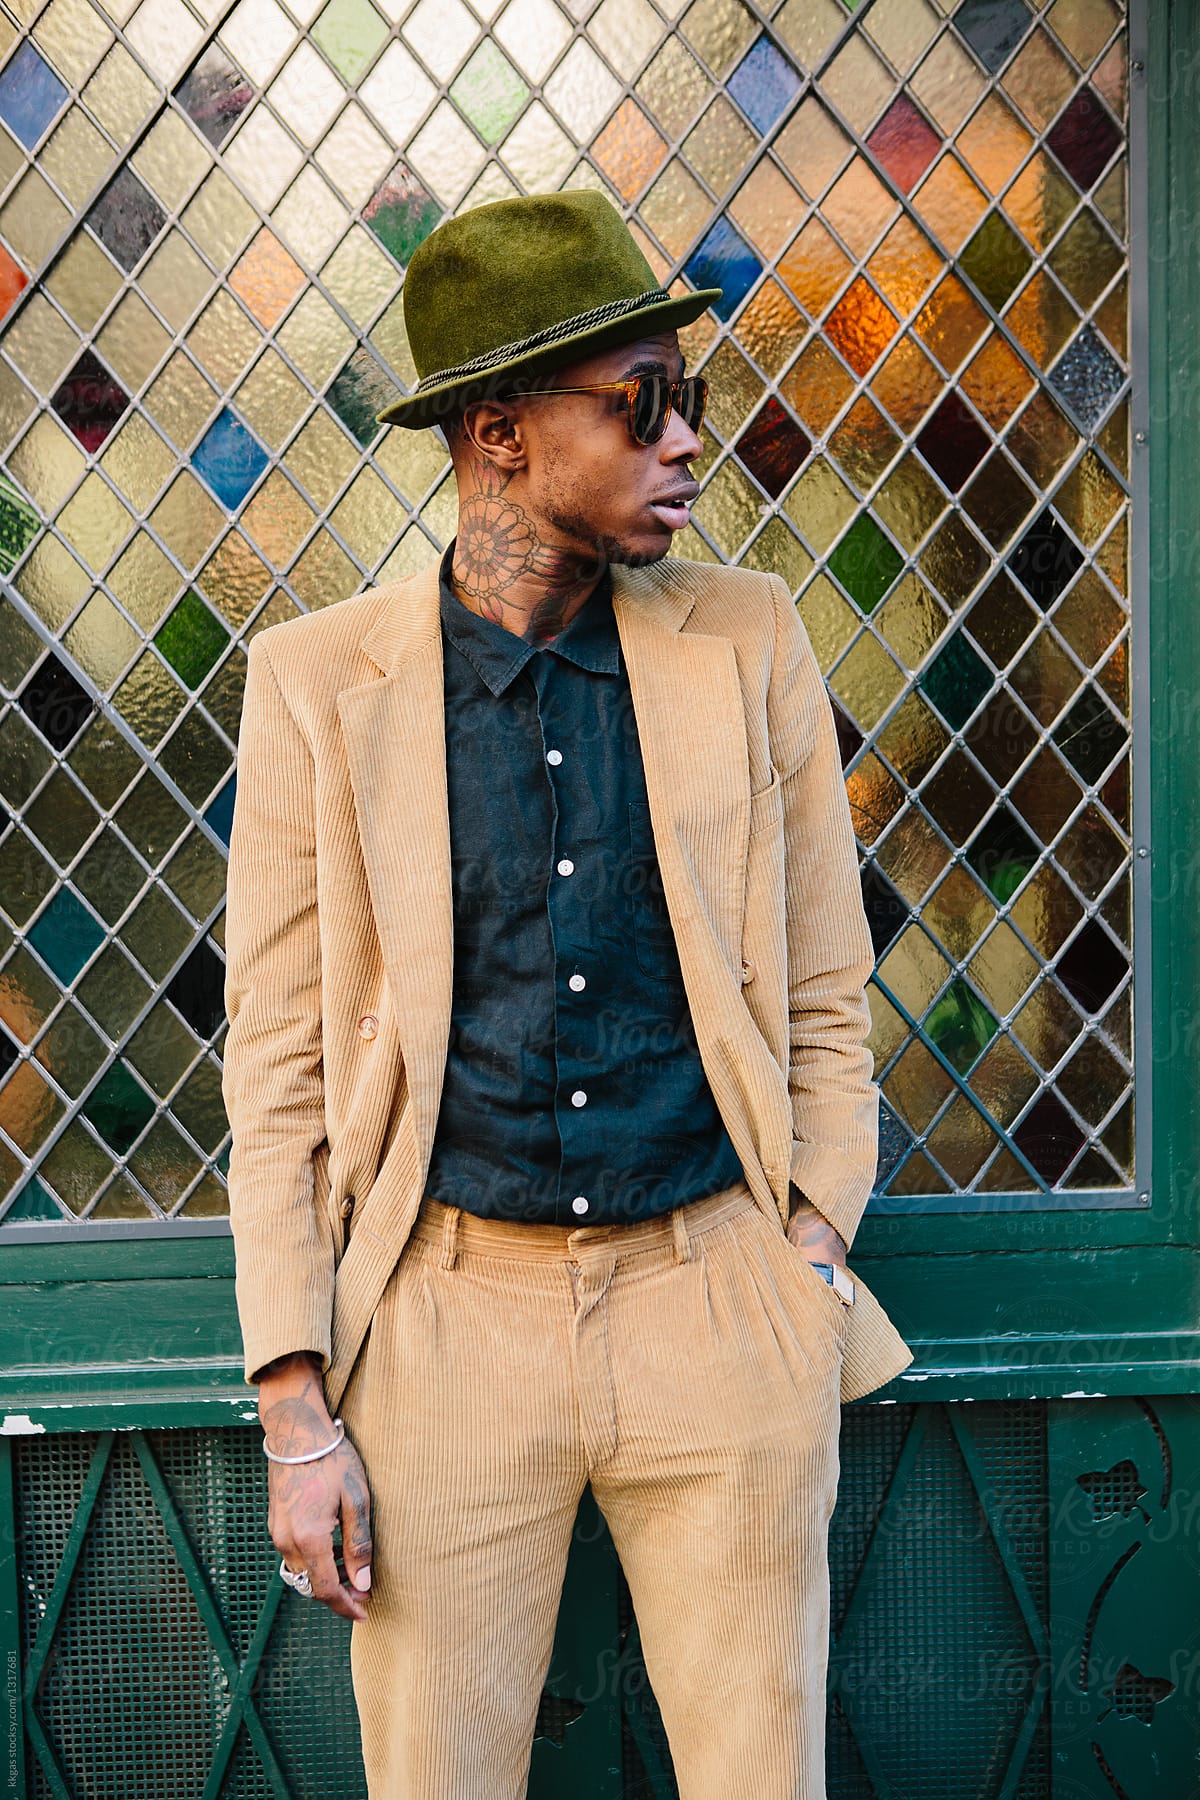 Stylish young black man with tattoos and hat